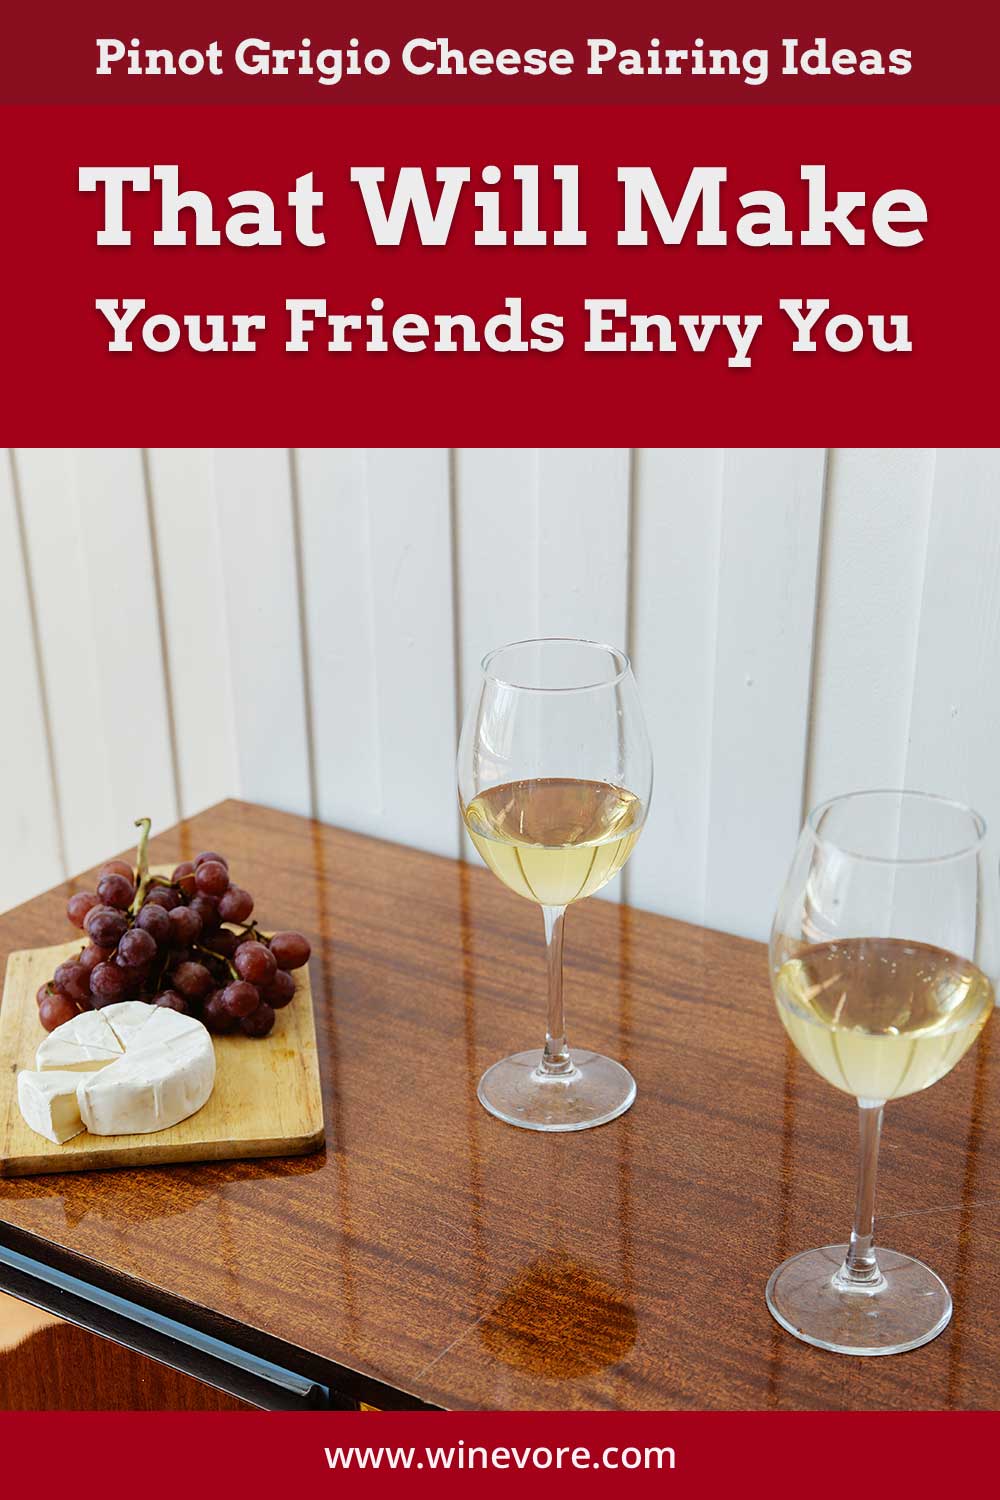 Two wine glasses near grapes and cheese - Pinot Grigio Cheese Pairing Ideas.